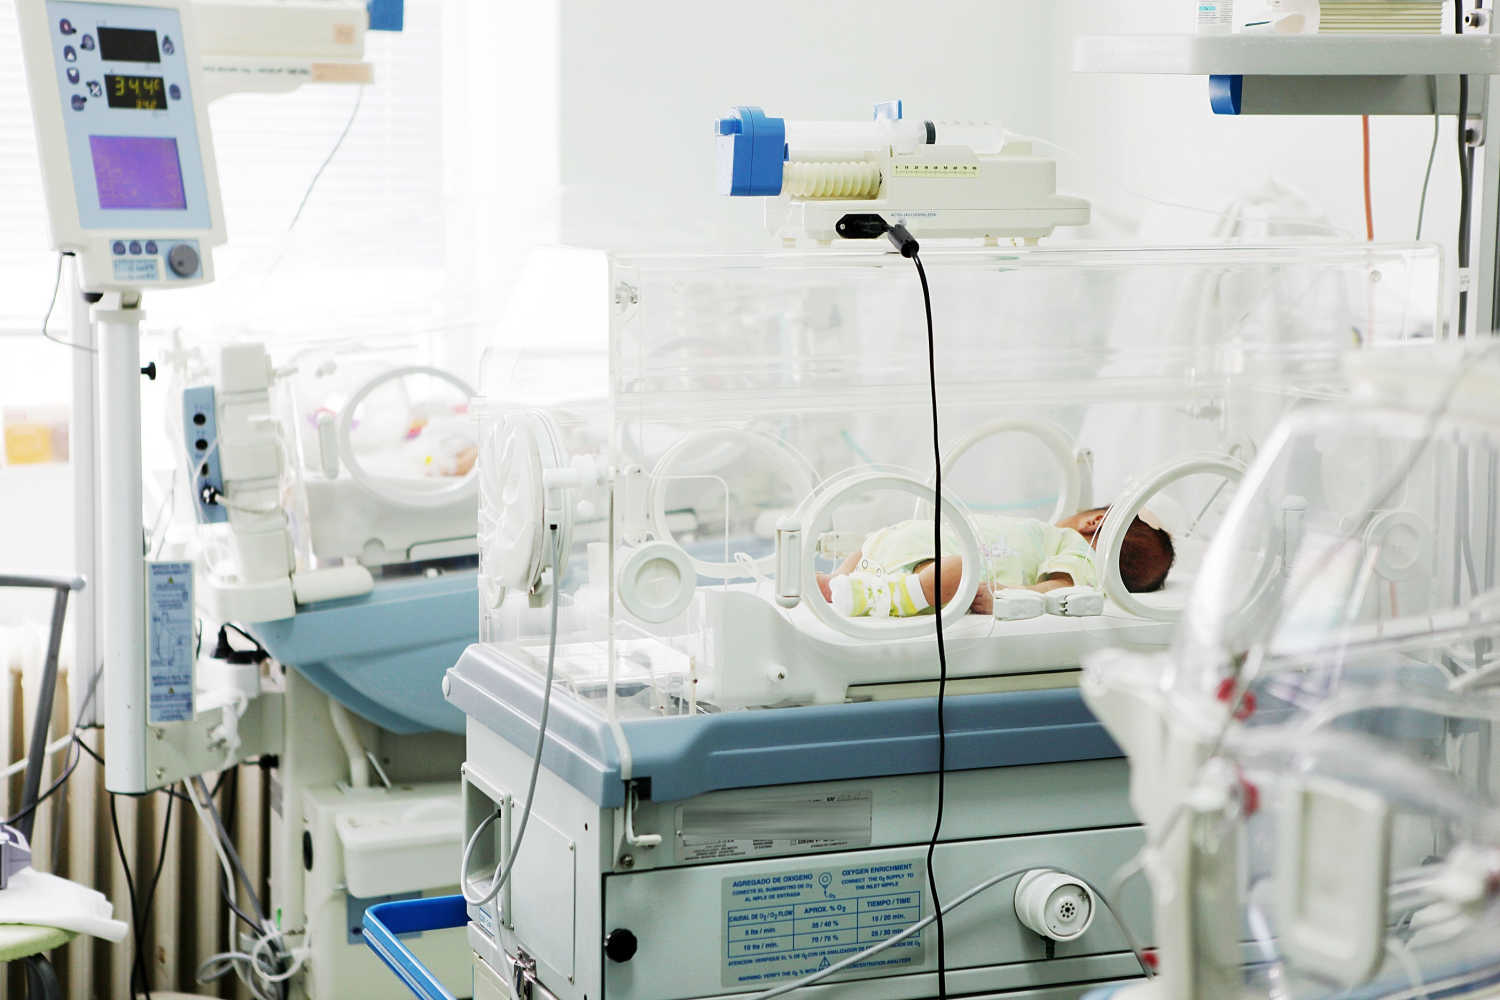 Are There Any Risks to DSC For Neonates